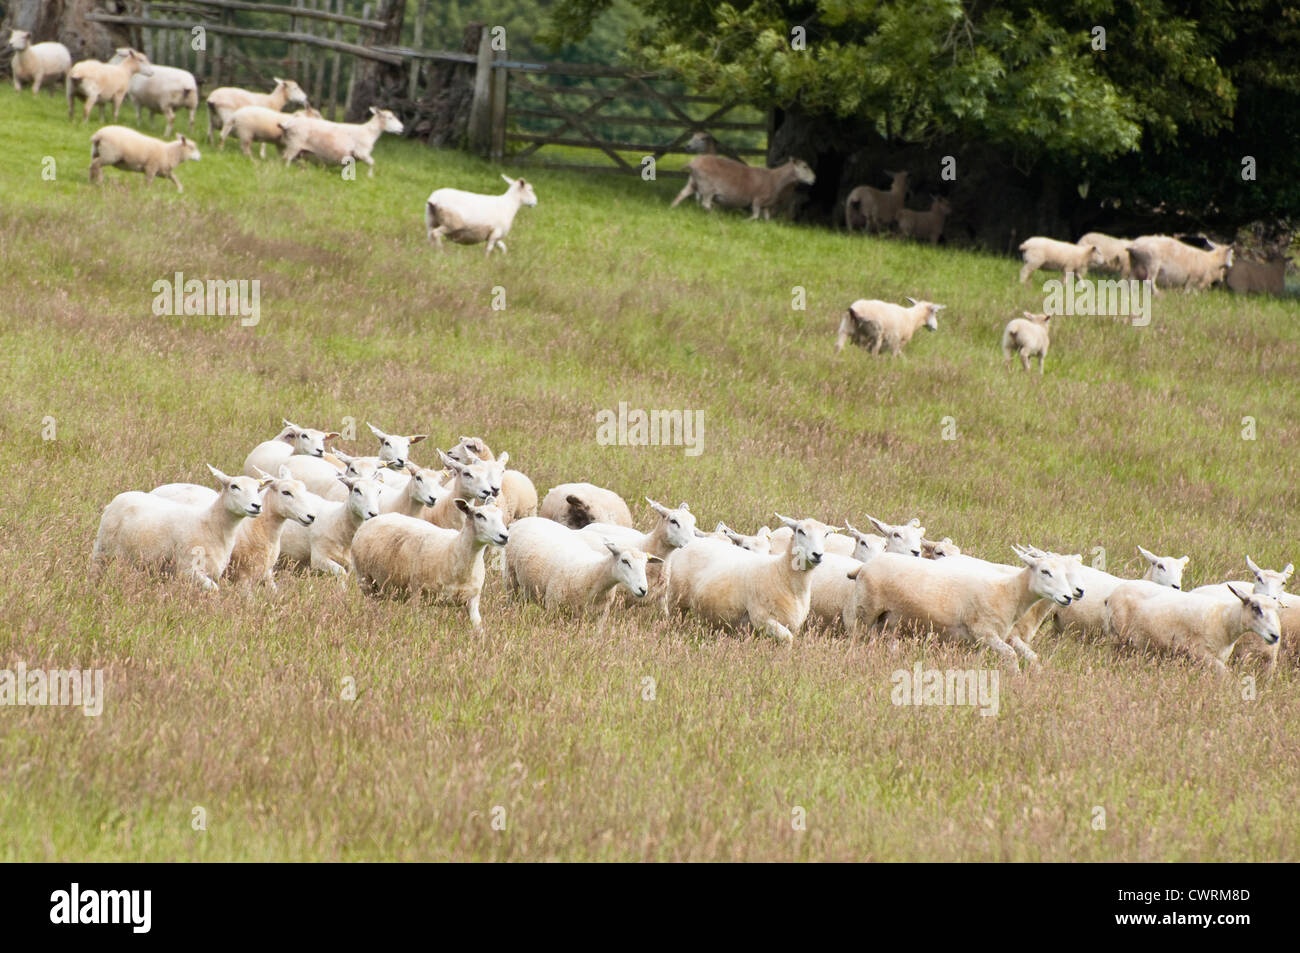 A flock of sheep, running together, across a field / grassy meadow, as they are being rounded up. UK. Stock Photo